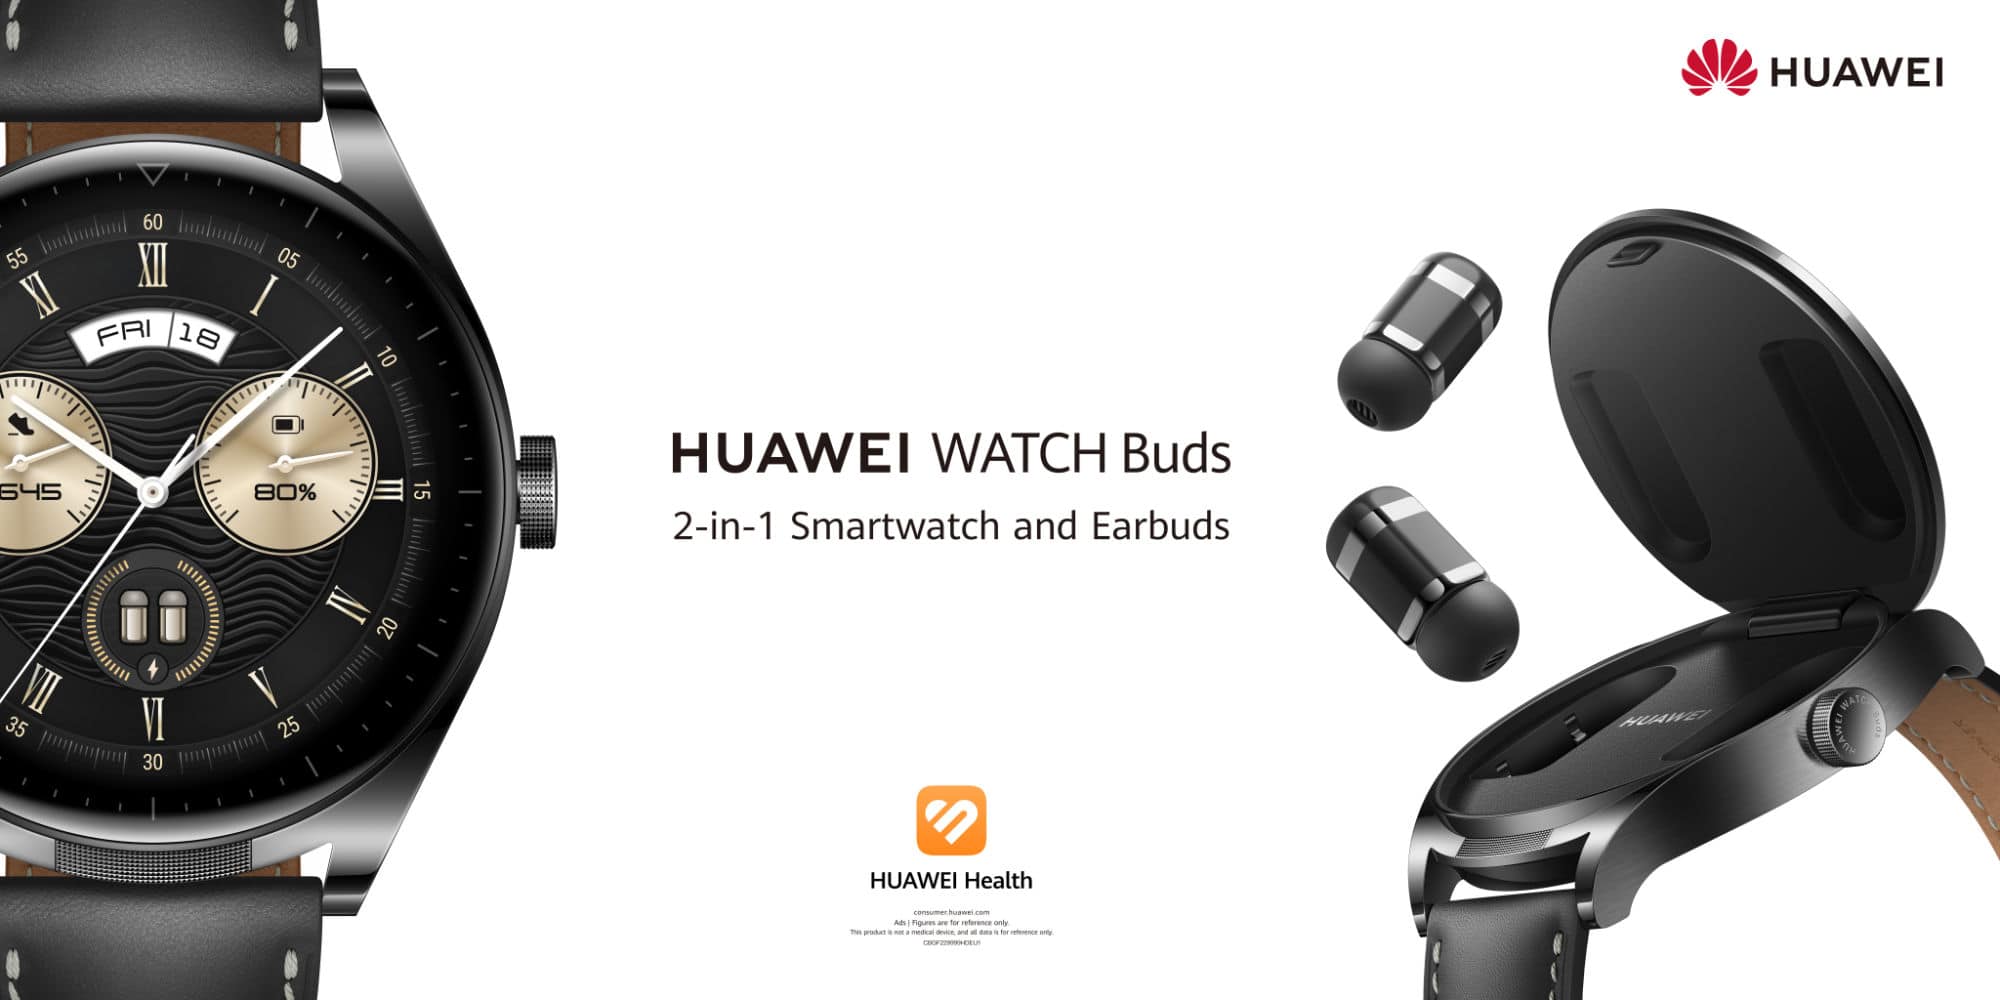 MWC 2023: The Huawei Watch Buds combines a smartwatch with earbuds